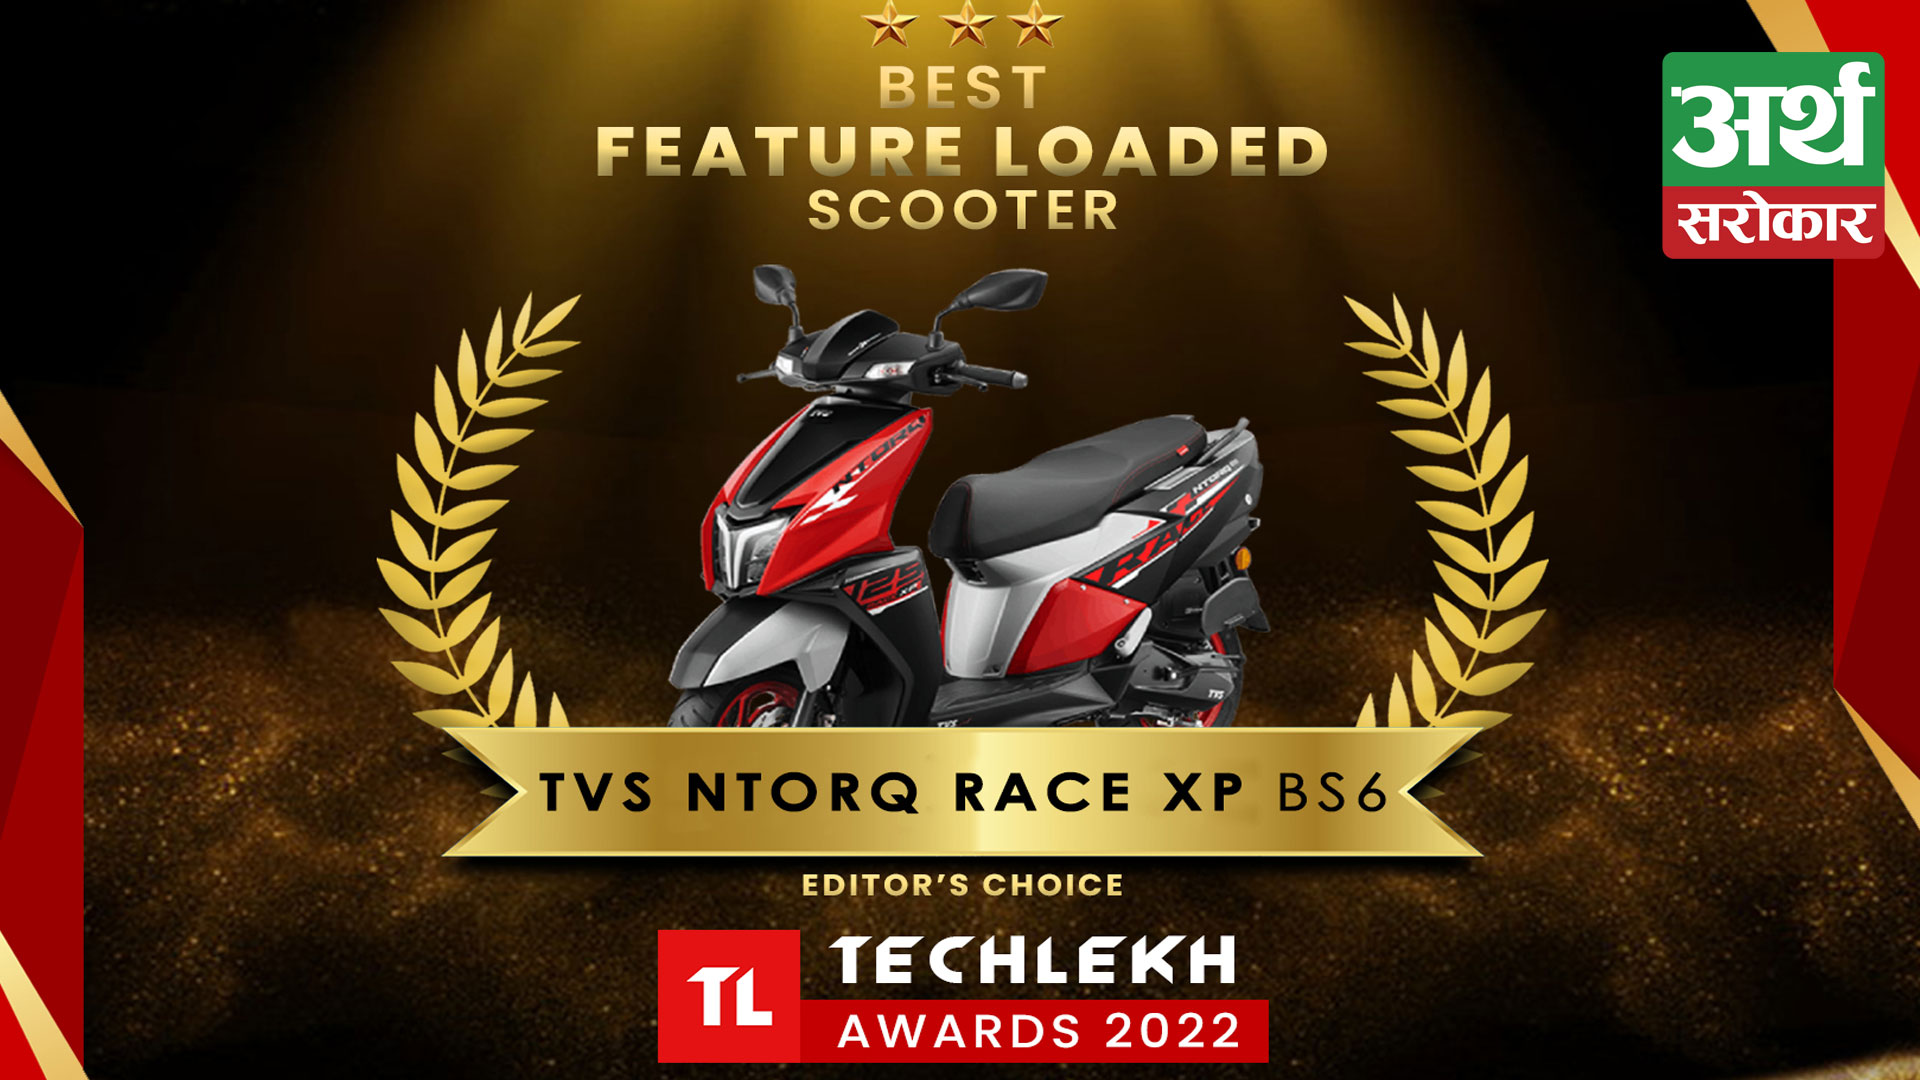 TVS NTORQ RACE XP Becomes the BEST FEATURE LOADED Scooter of 2022